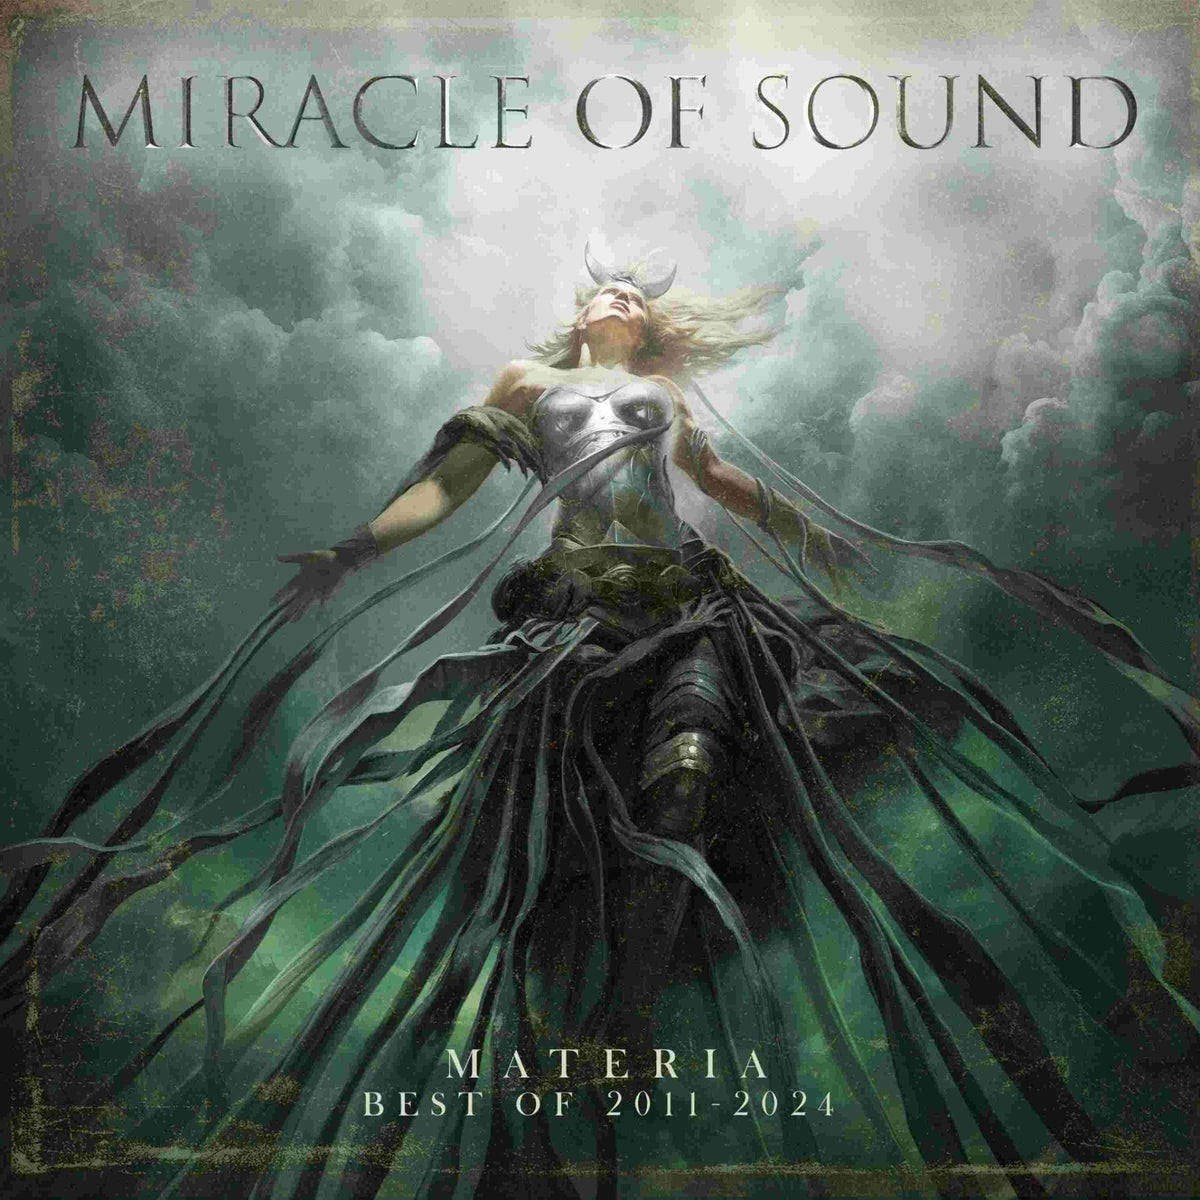 Miracle of Sound - Materia Best Of 2011 - 2024 - NPR1339DP